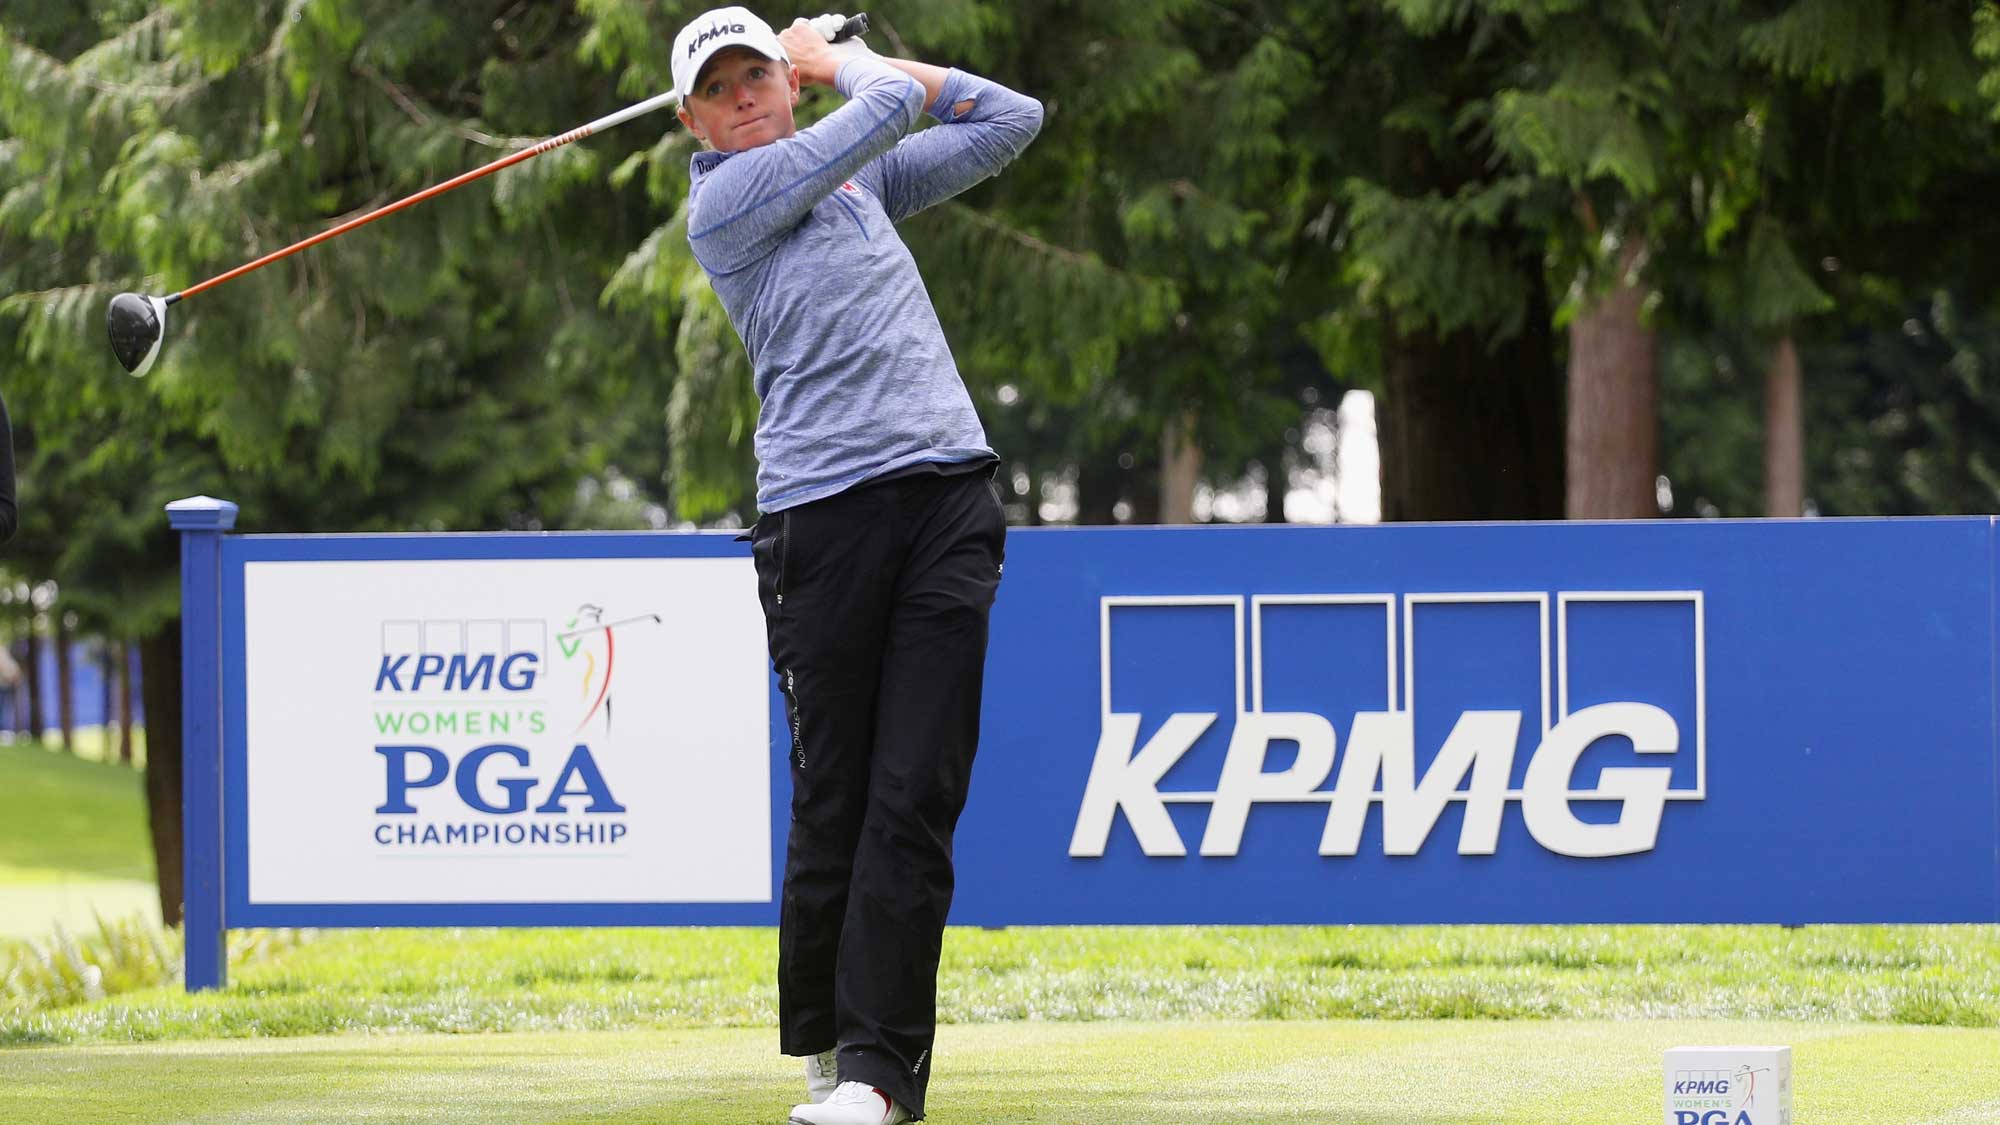 Stacy Lewis hits her tee shot on the 15th hole during the third round of the KPMG Women's PGA Championship